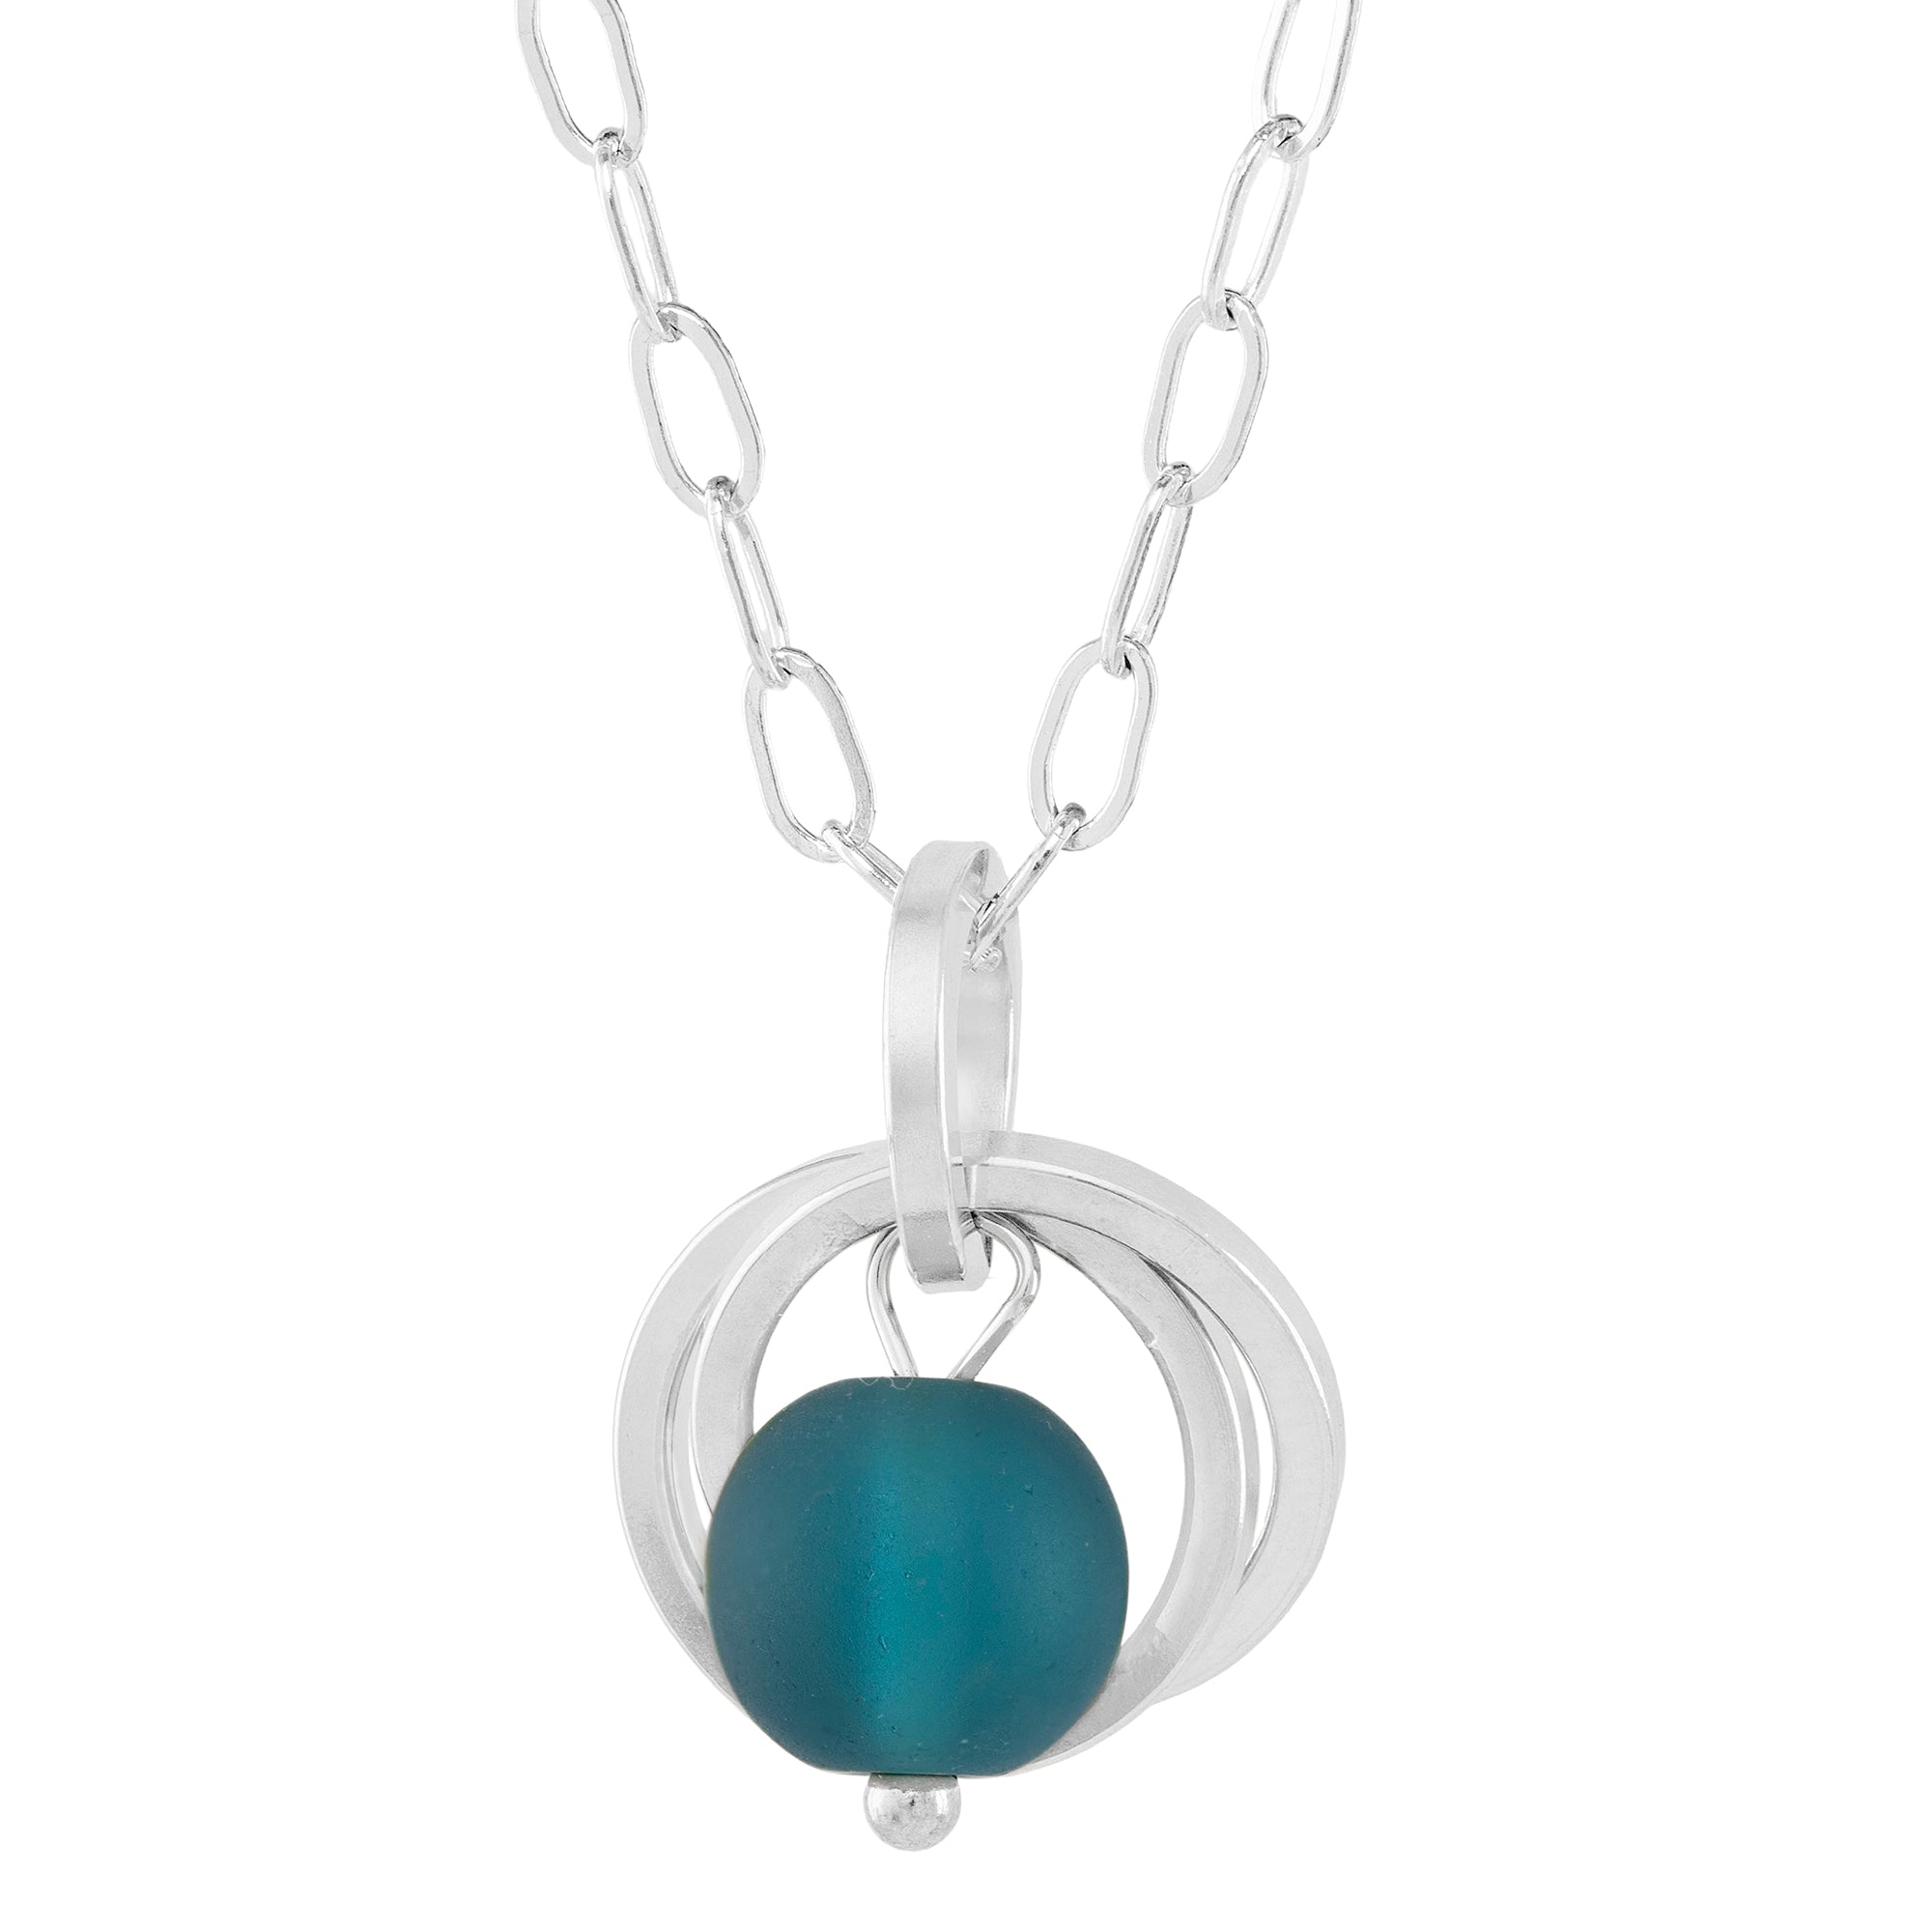 Teal Peacock Blue Round Recycled Glass Ball with Sterling Silver Circles Pendant Necklace